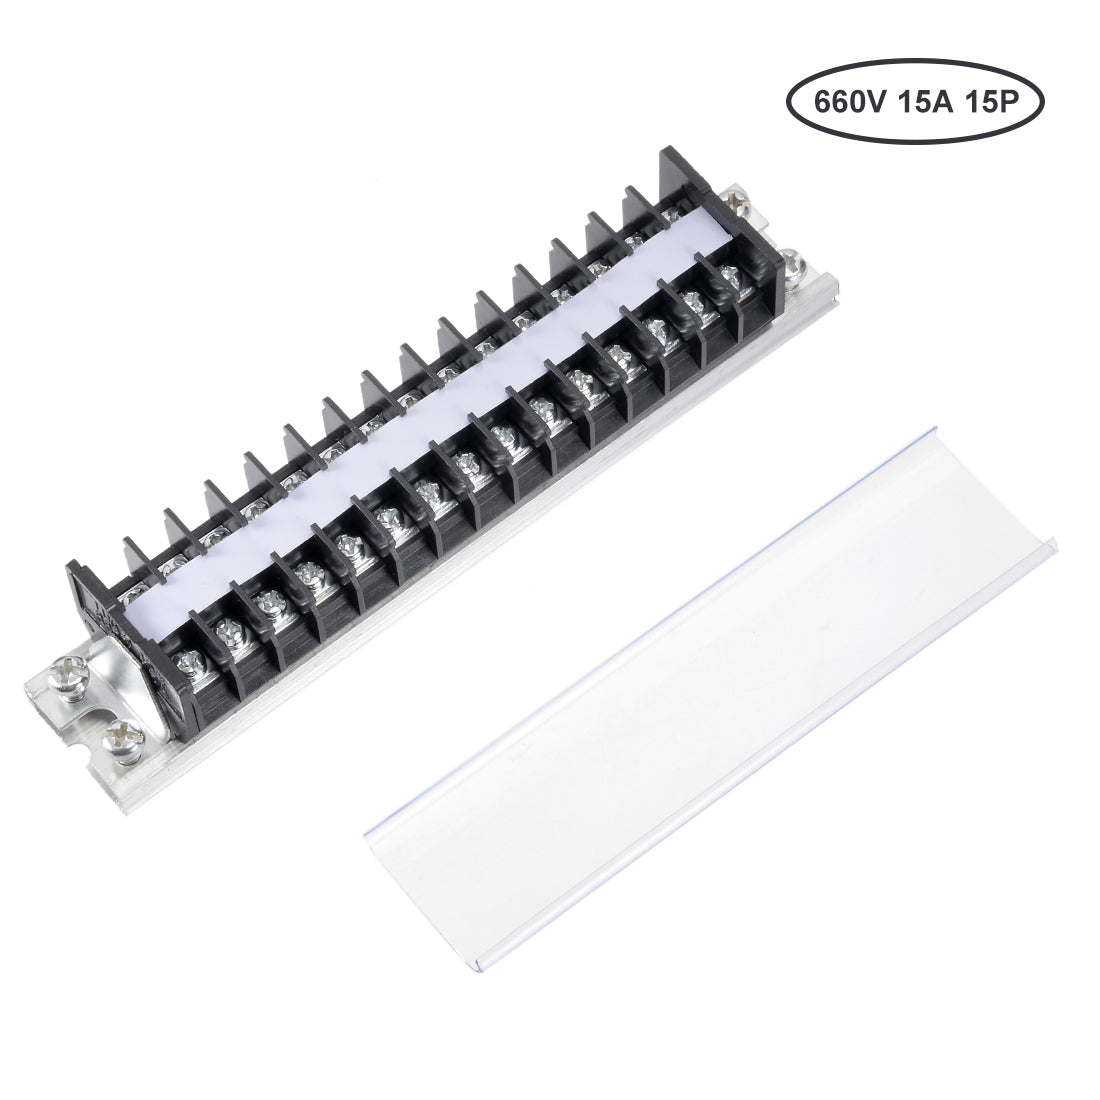 uxcell Uxcell Barrier Terminal Strip Block 660V 15A Dual Rows 15P DIN Rail Base Screw Connector